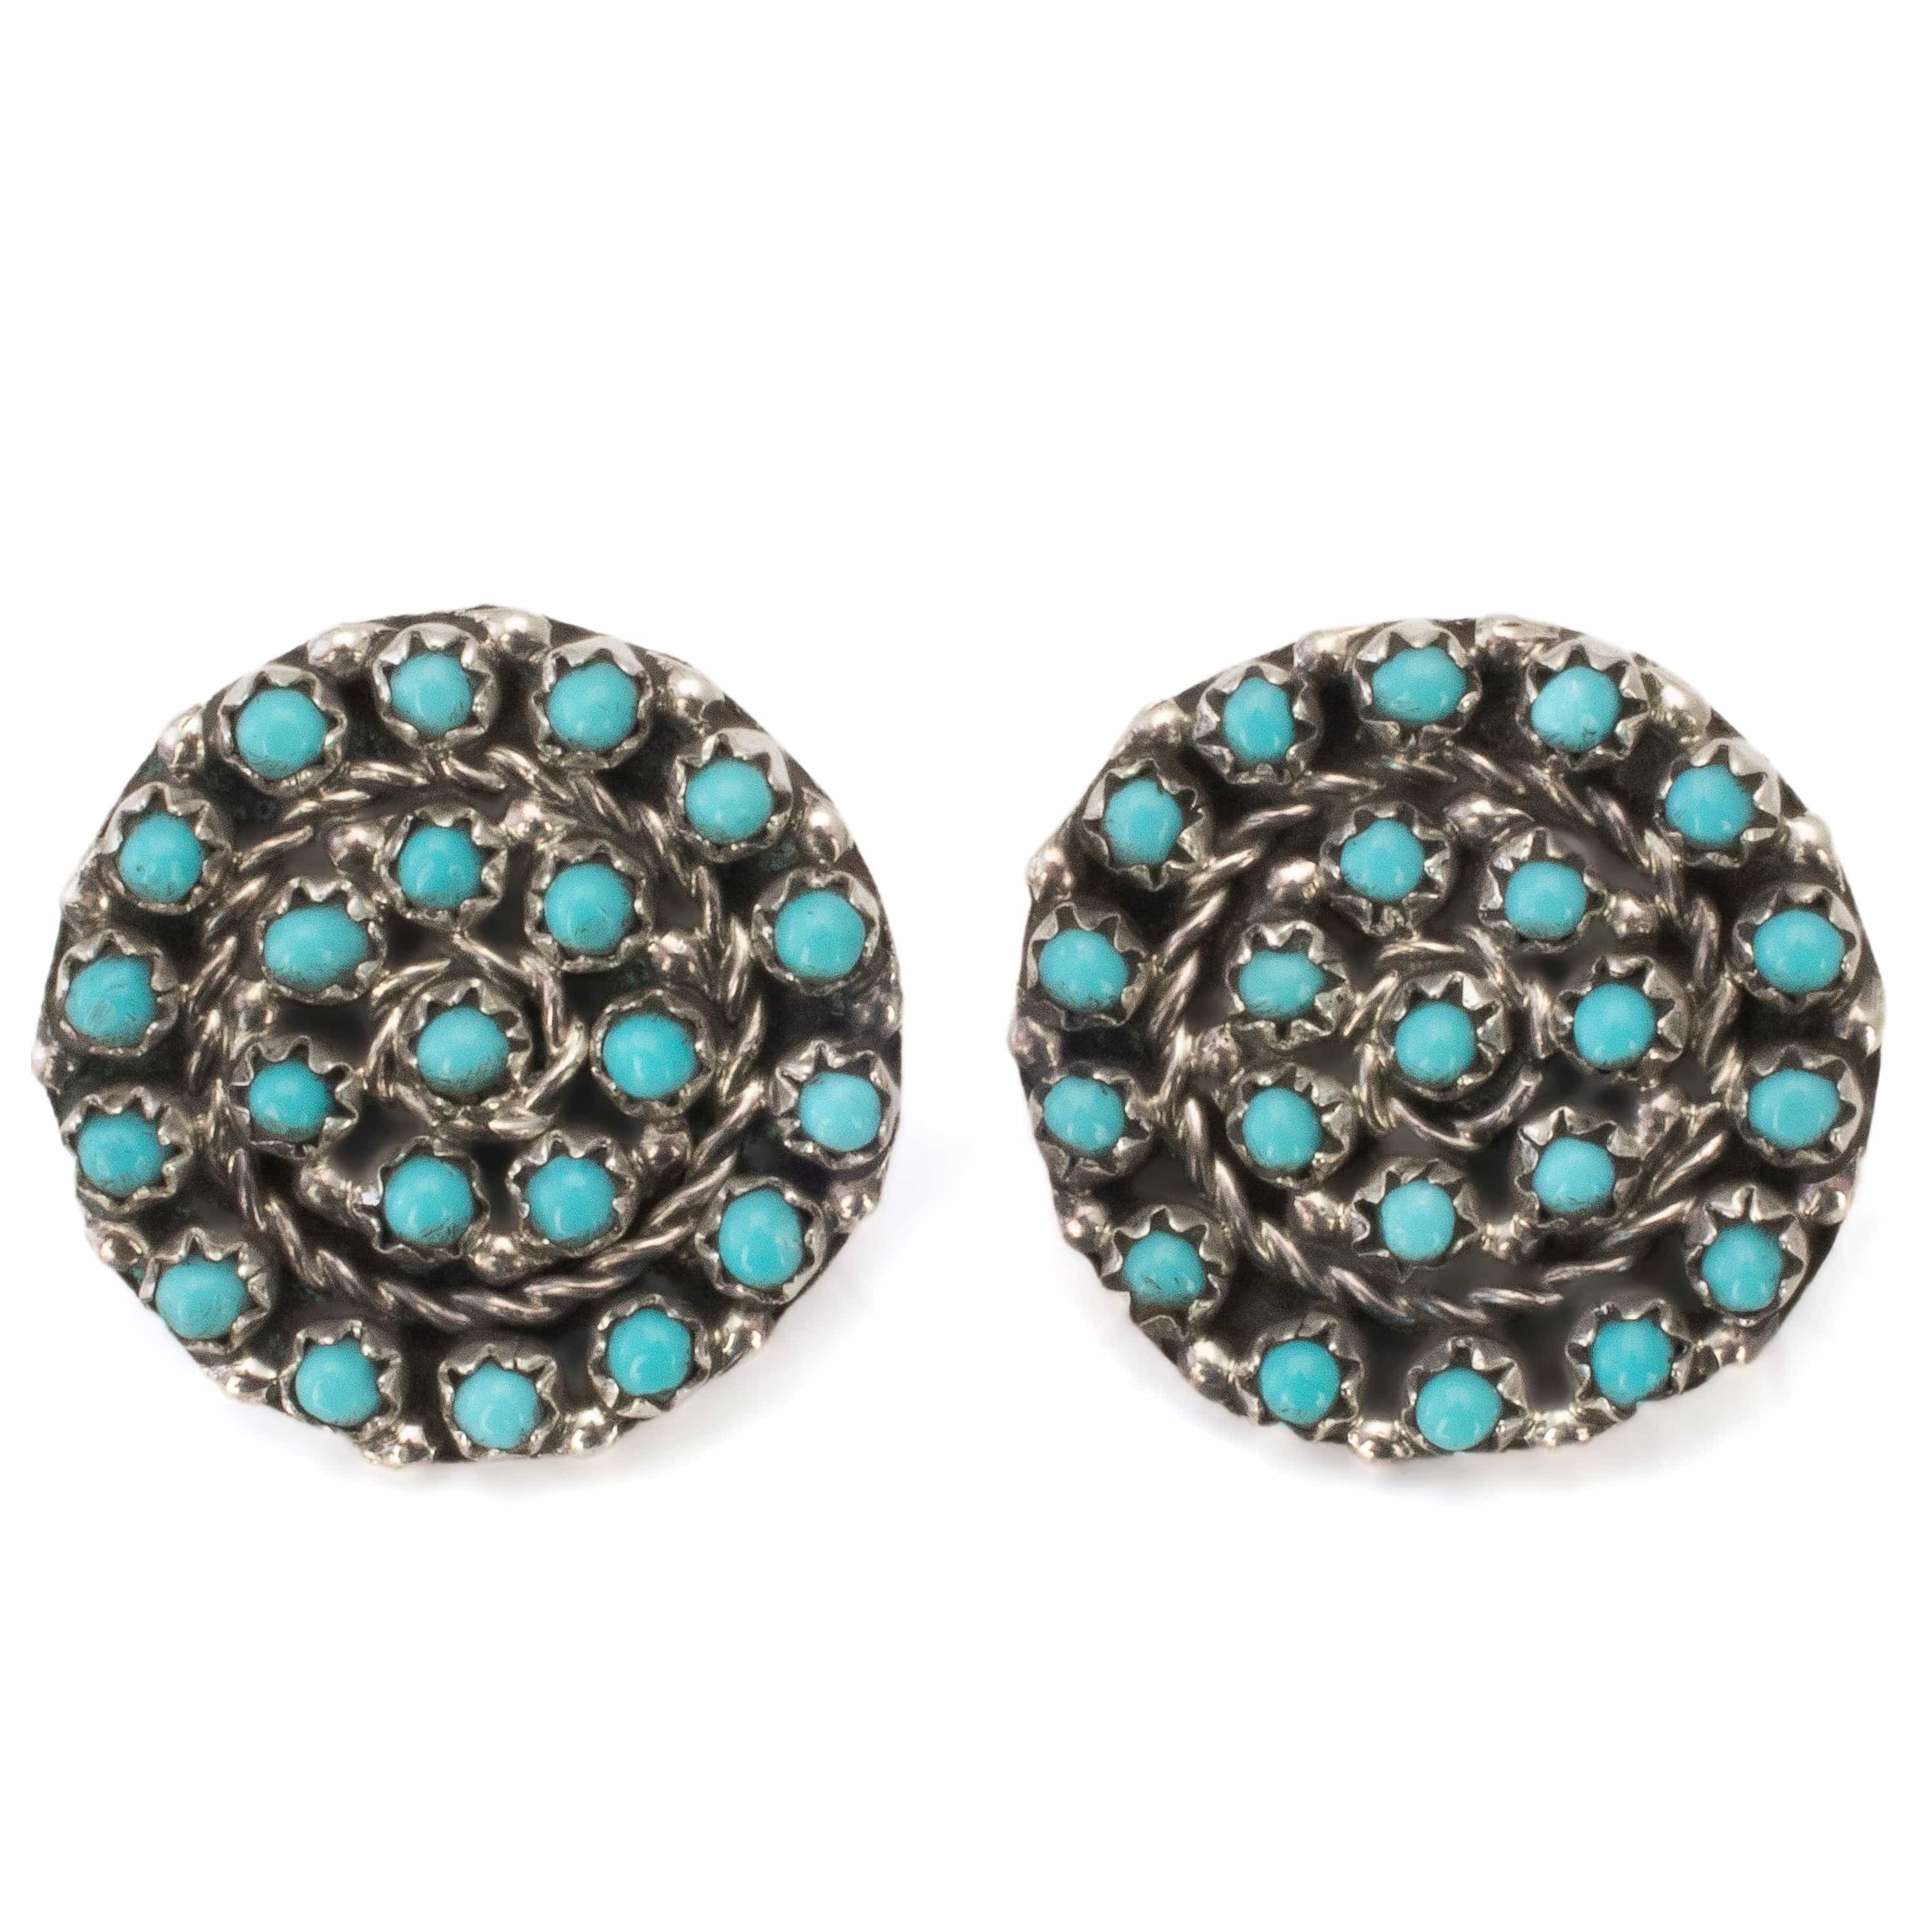 Kalifano Native American Jewelry Kingman Turquoise Zuni Circular Petit Point USA Native American Made Sterling Silver Earrings with Stud Backing NAE800.004